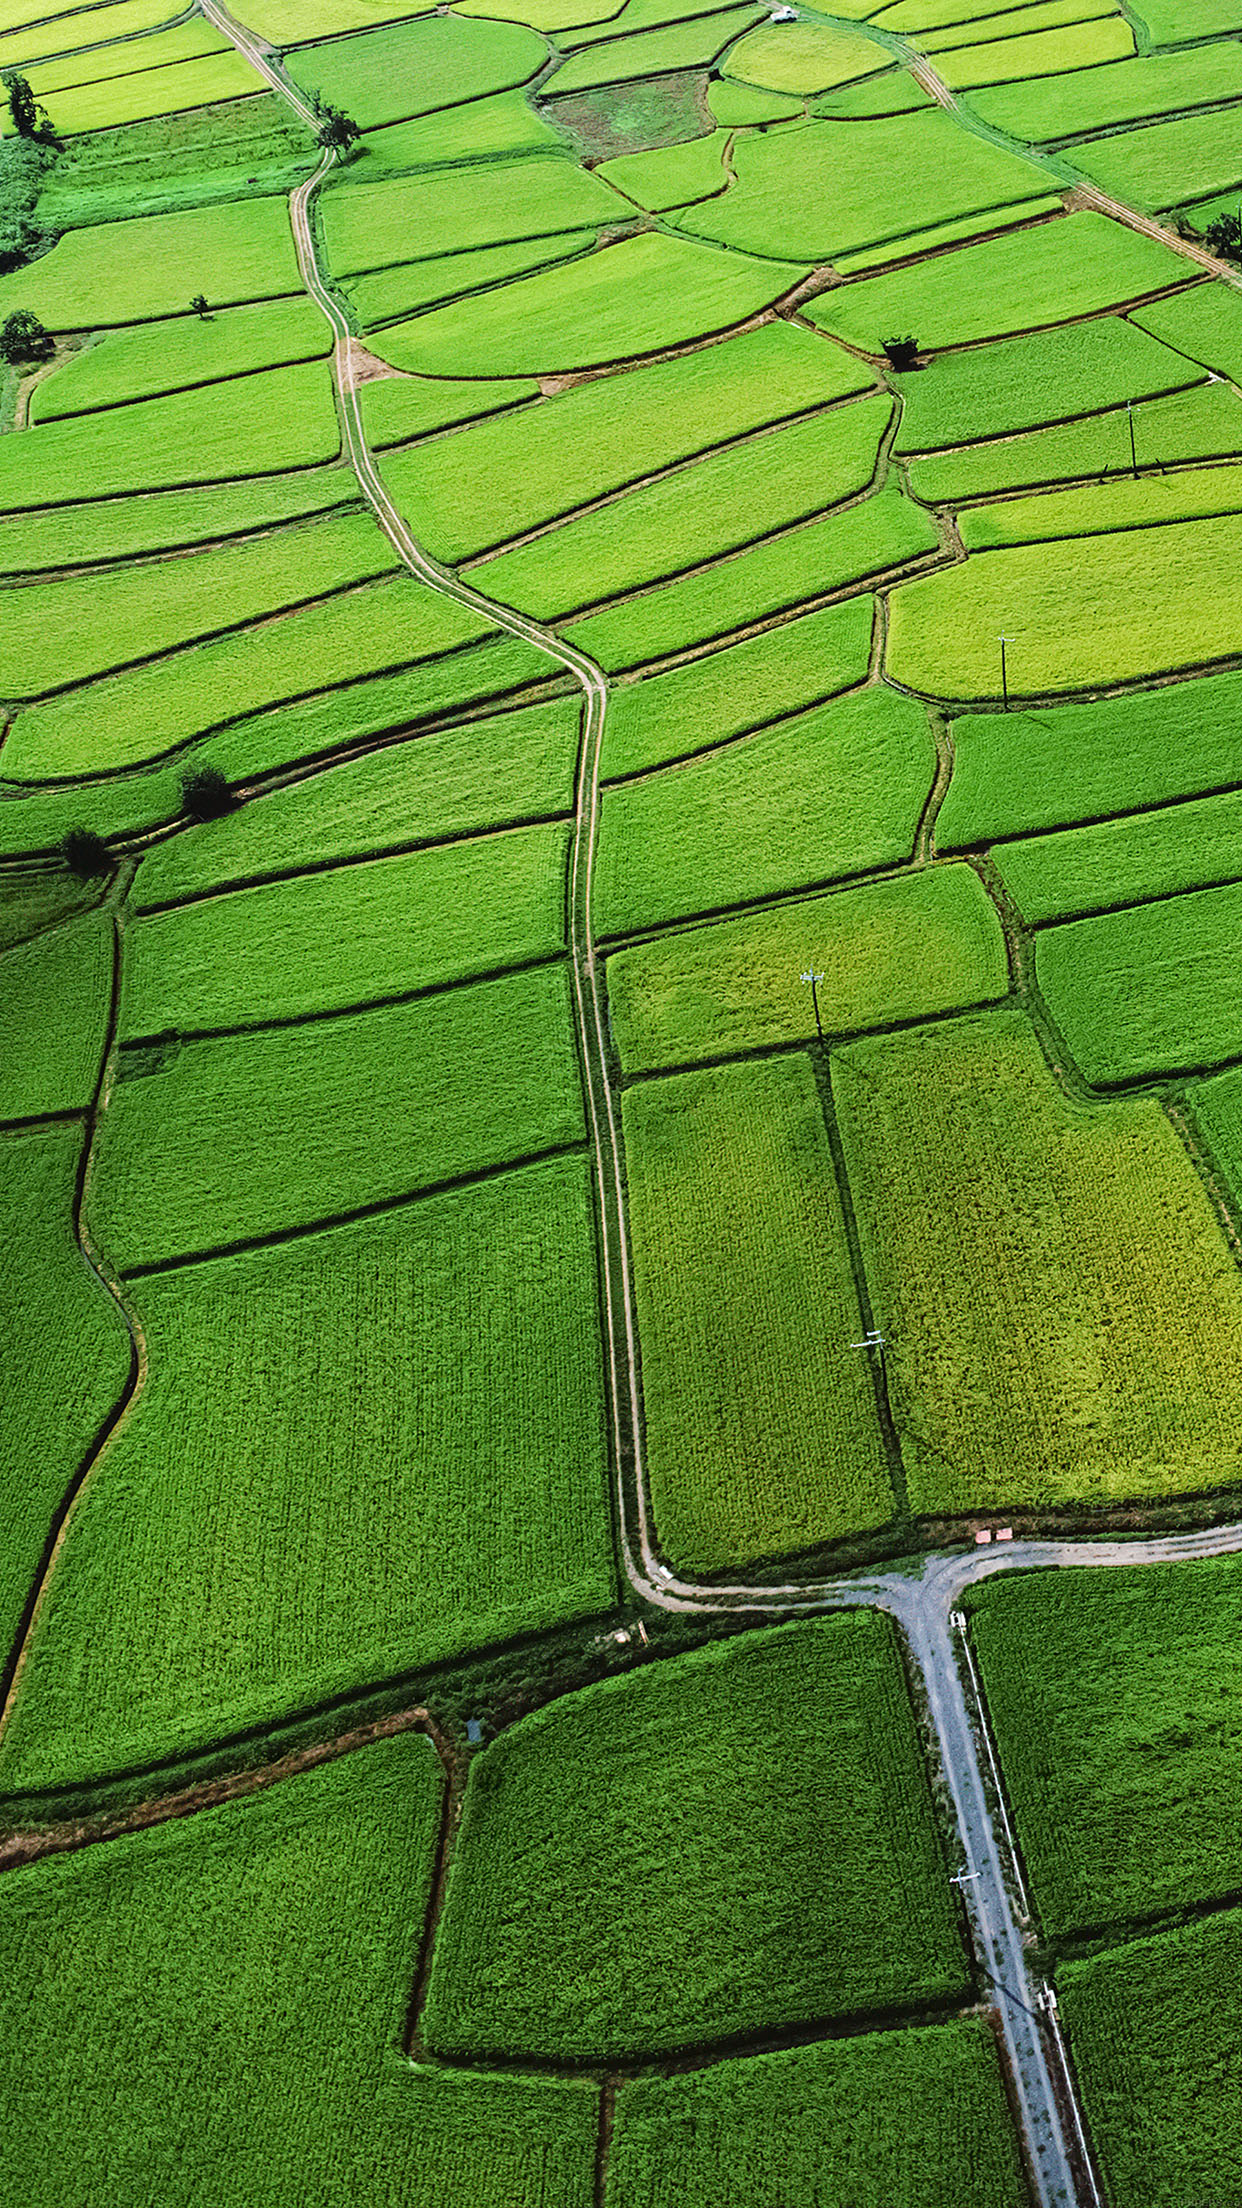 Japan Rice Paddy Field Nature Android wallpaper